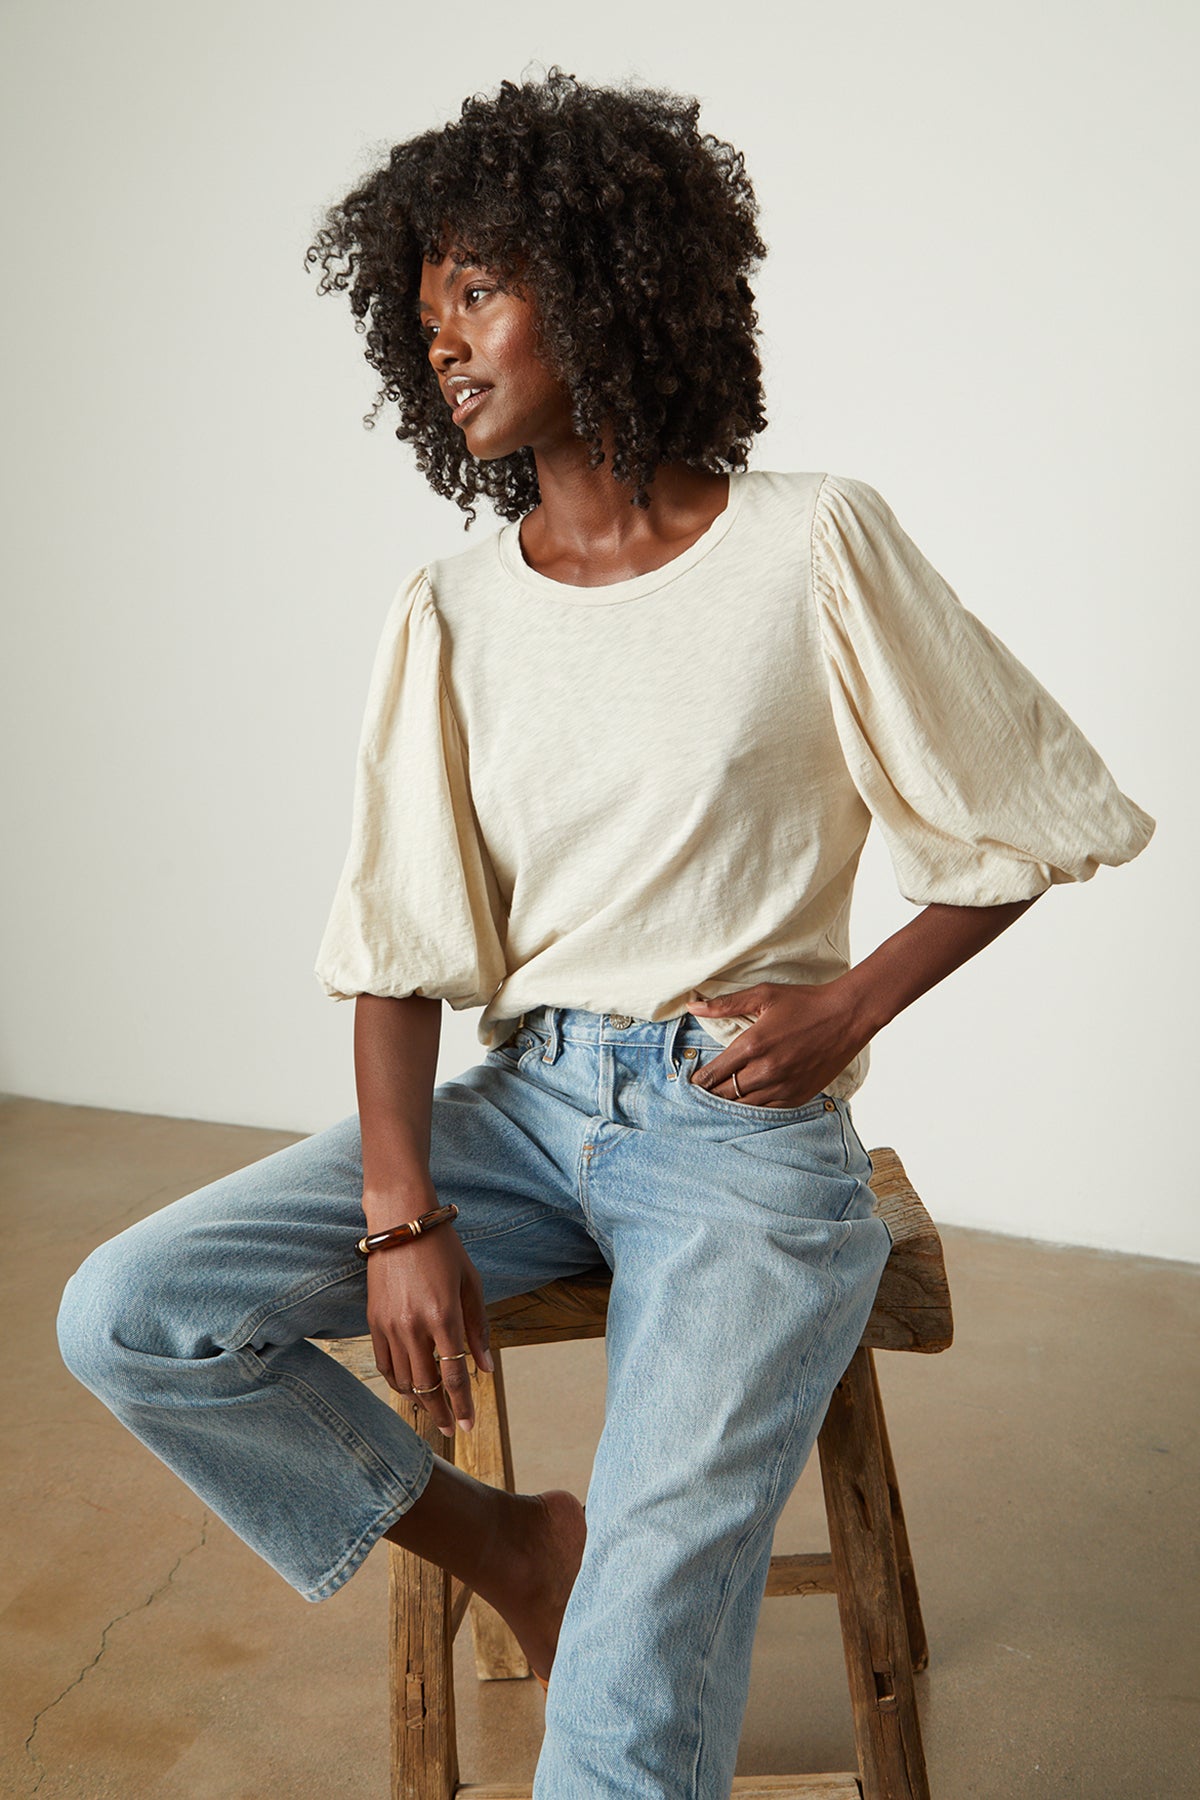 A woman is sitting on a stool wearing UMA PUFF SLEEVE TEE by Velvet by Graham & Spencer, jeans, and a blouse.-26022623183041